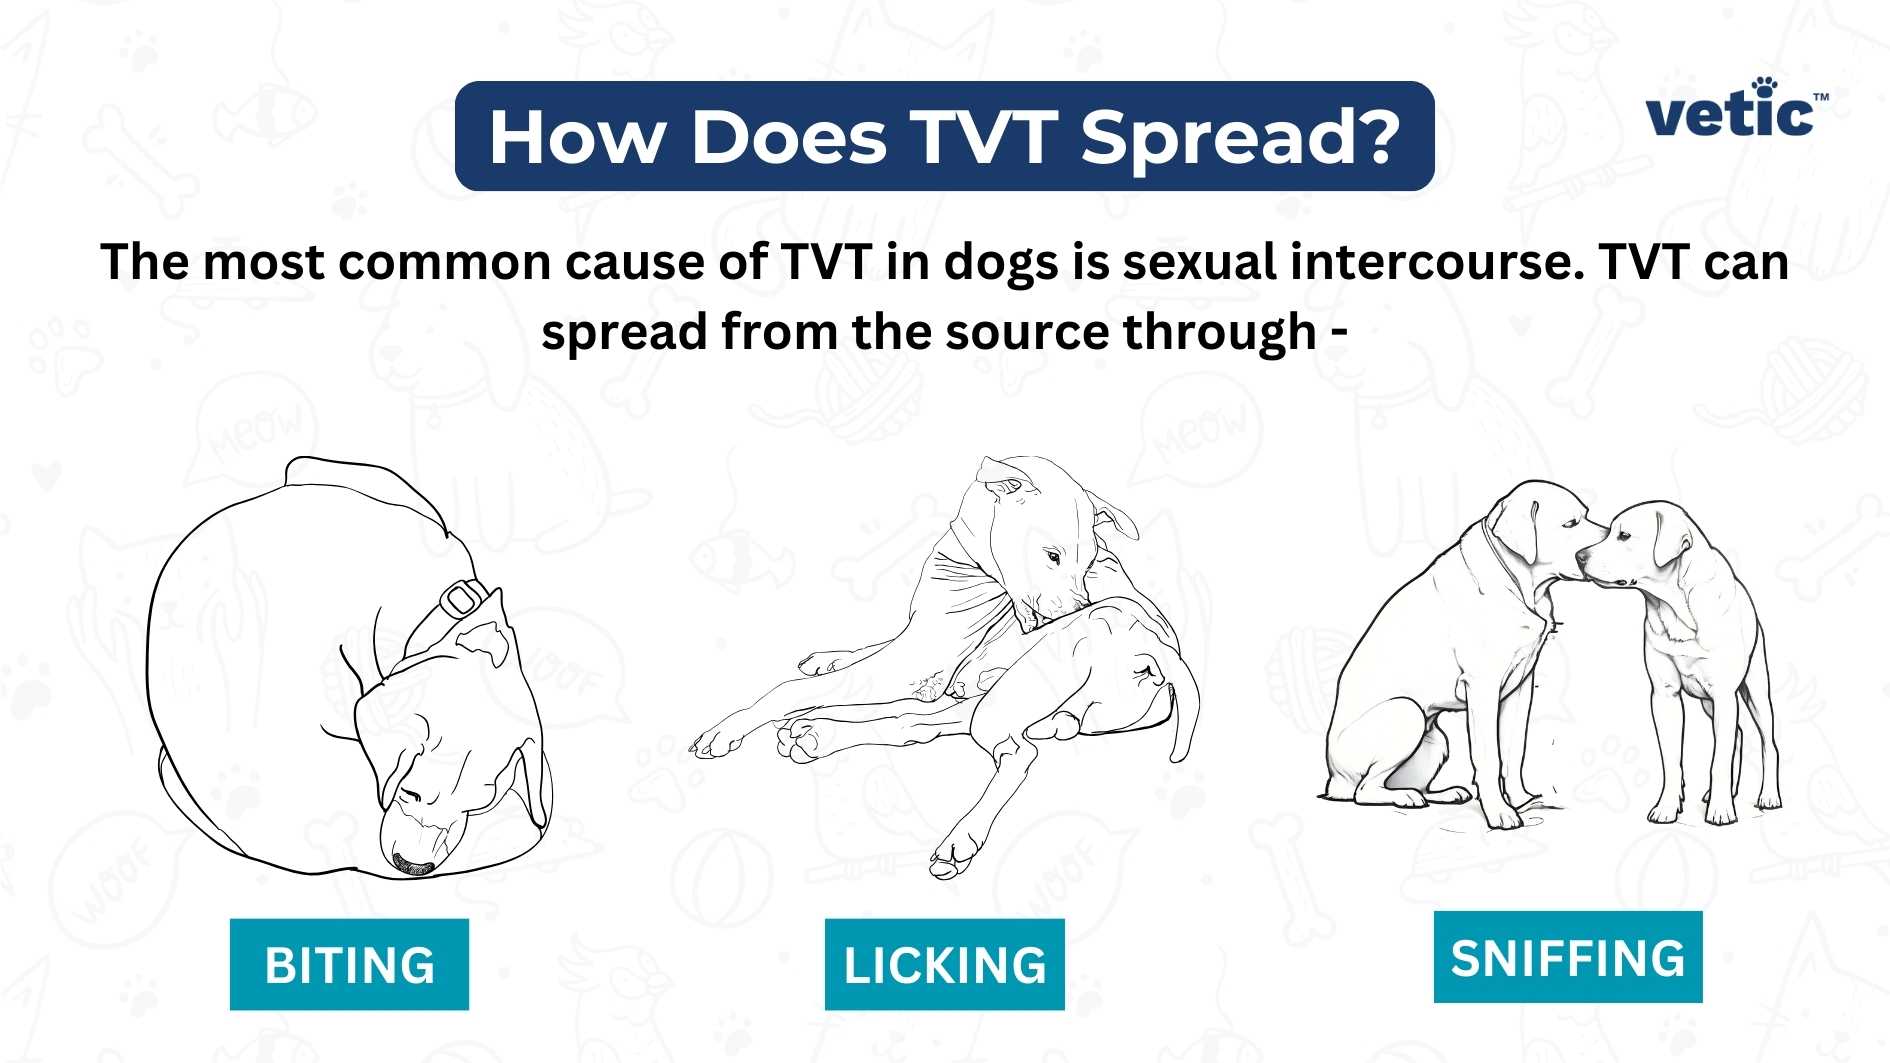 Infographic by Vetic on How Does TVT Spread? The most common cause of TVT in dogs is sexual intercourse. TVT can spread from the source through - Biting Licking Sniffing